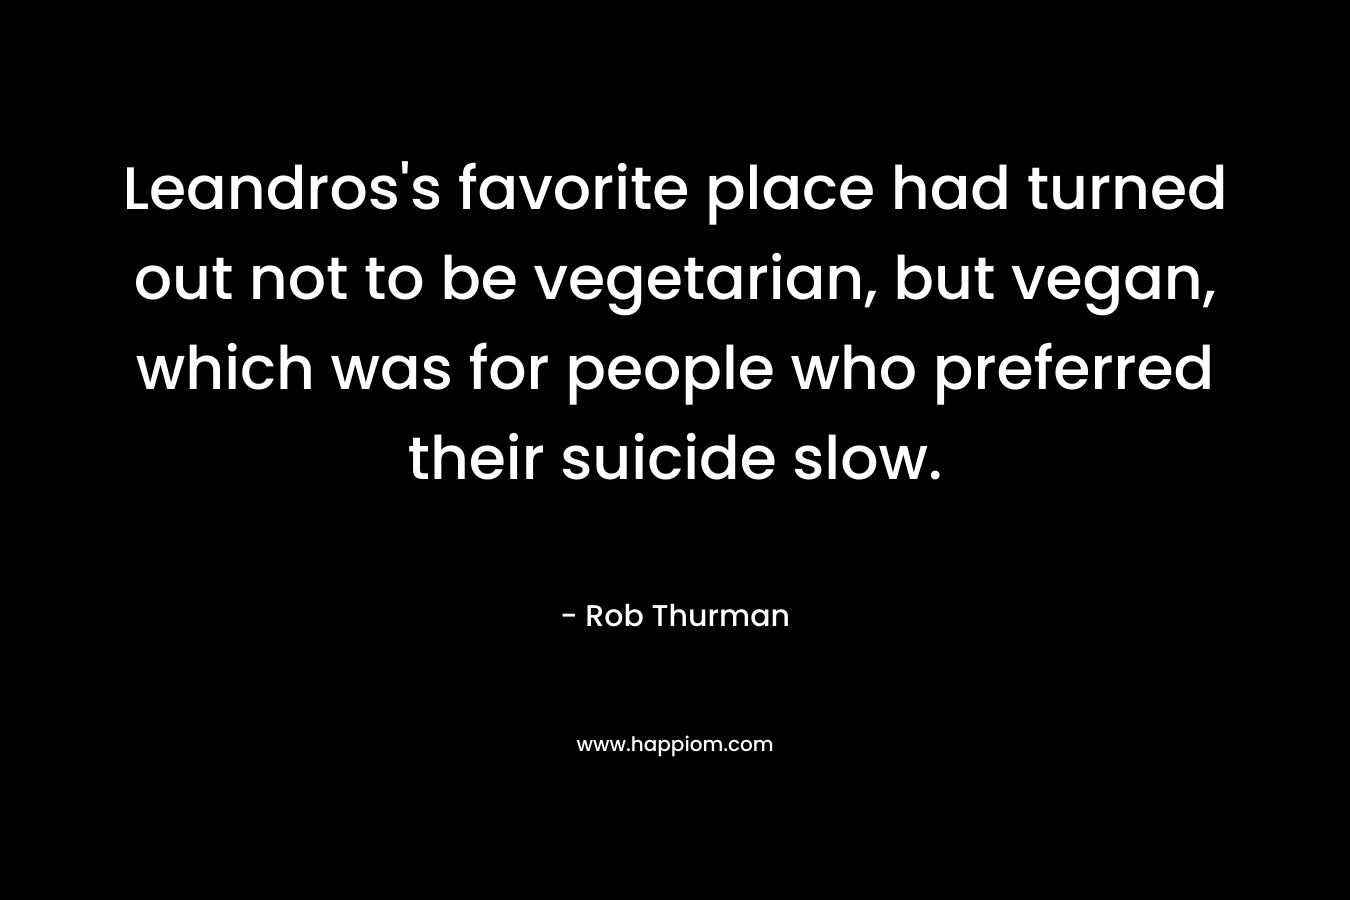 Leandros’s favorite place had turned out not to be vegetarian, but vegan, which was for people who preferred their suicide slow. – Rob Thurman